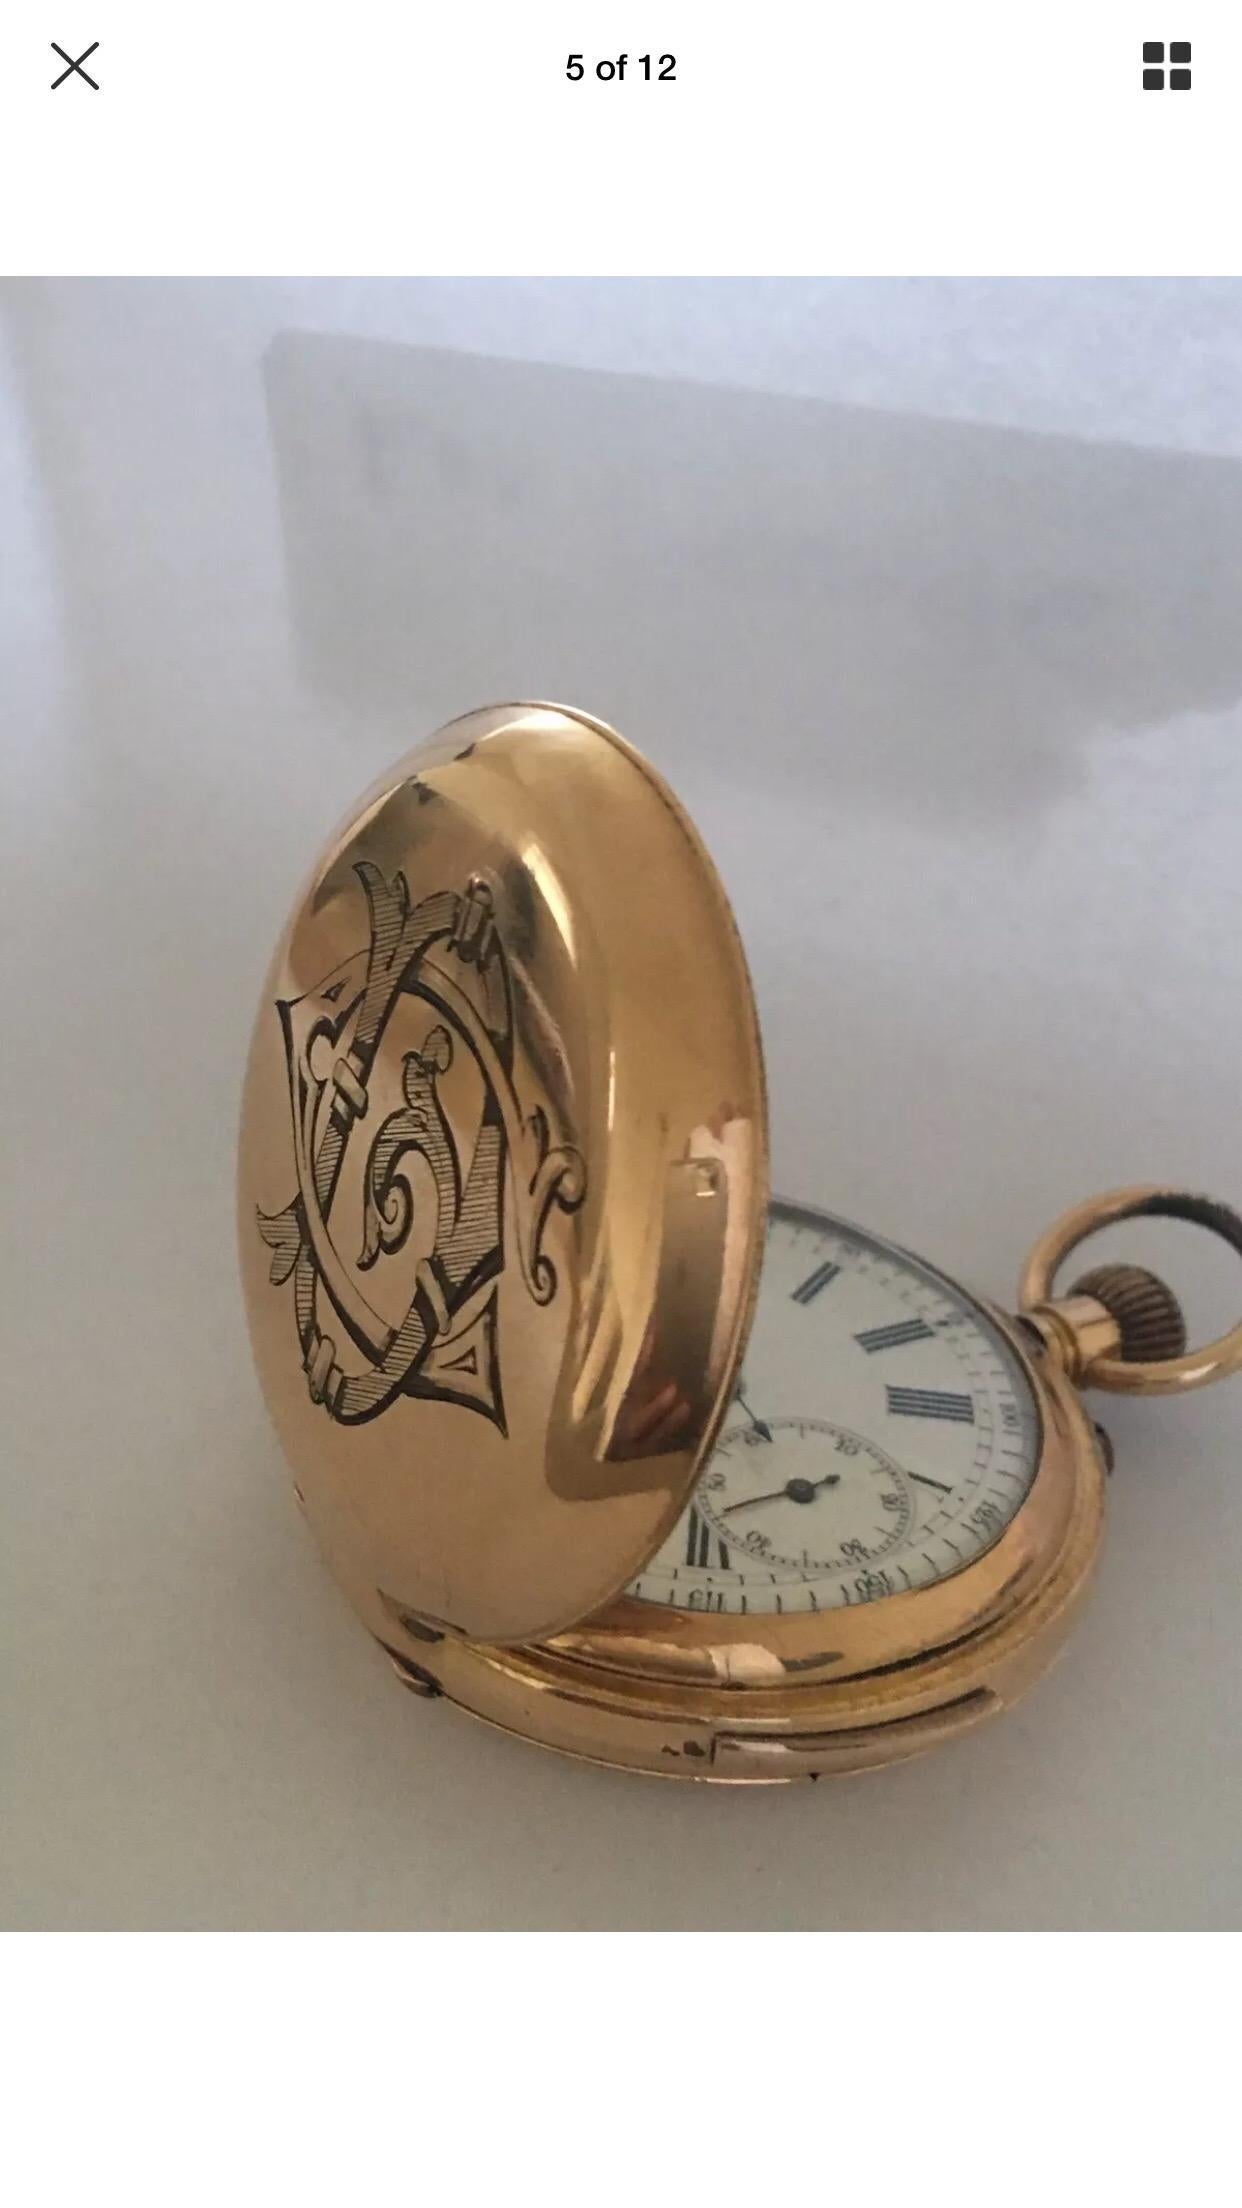 Women's or Men's Antique Gold-Plated Quarter Repeater Chronograph Pocket Watch